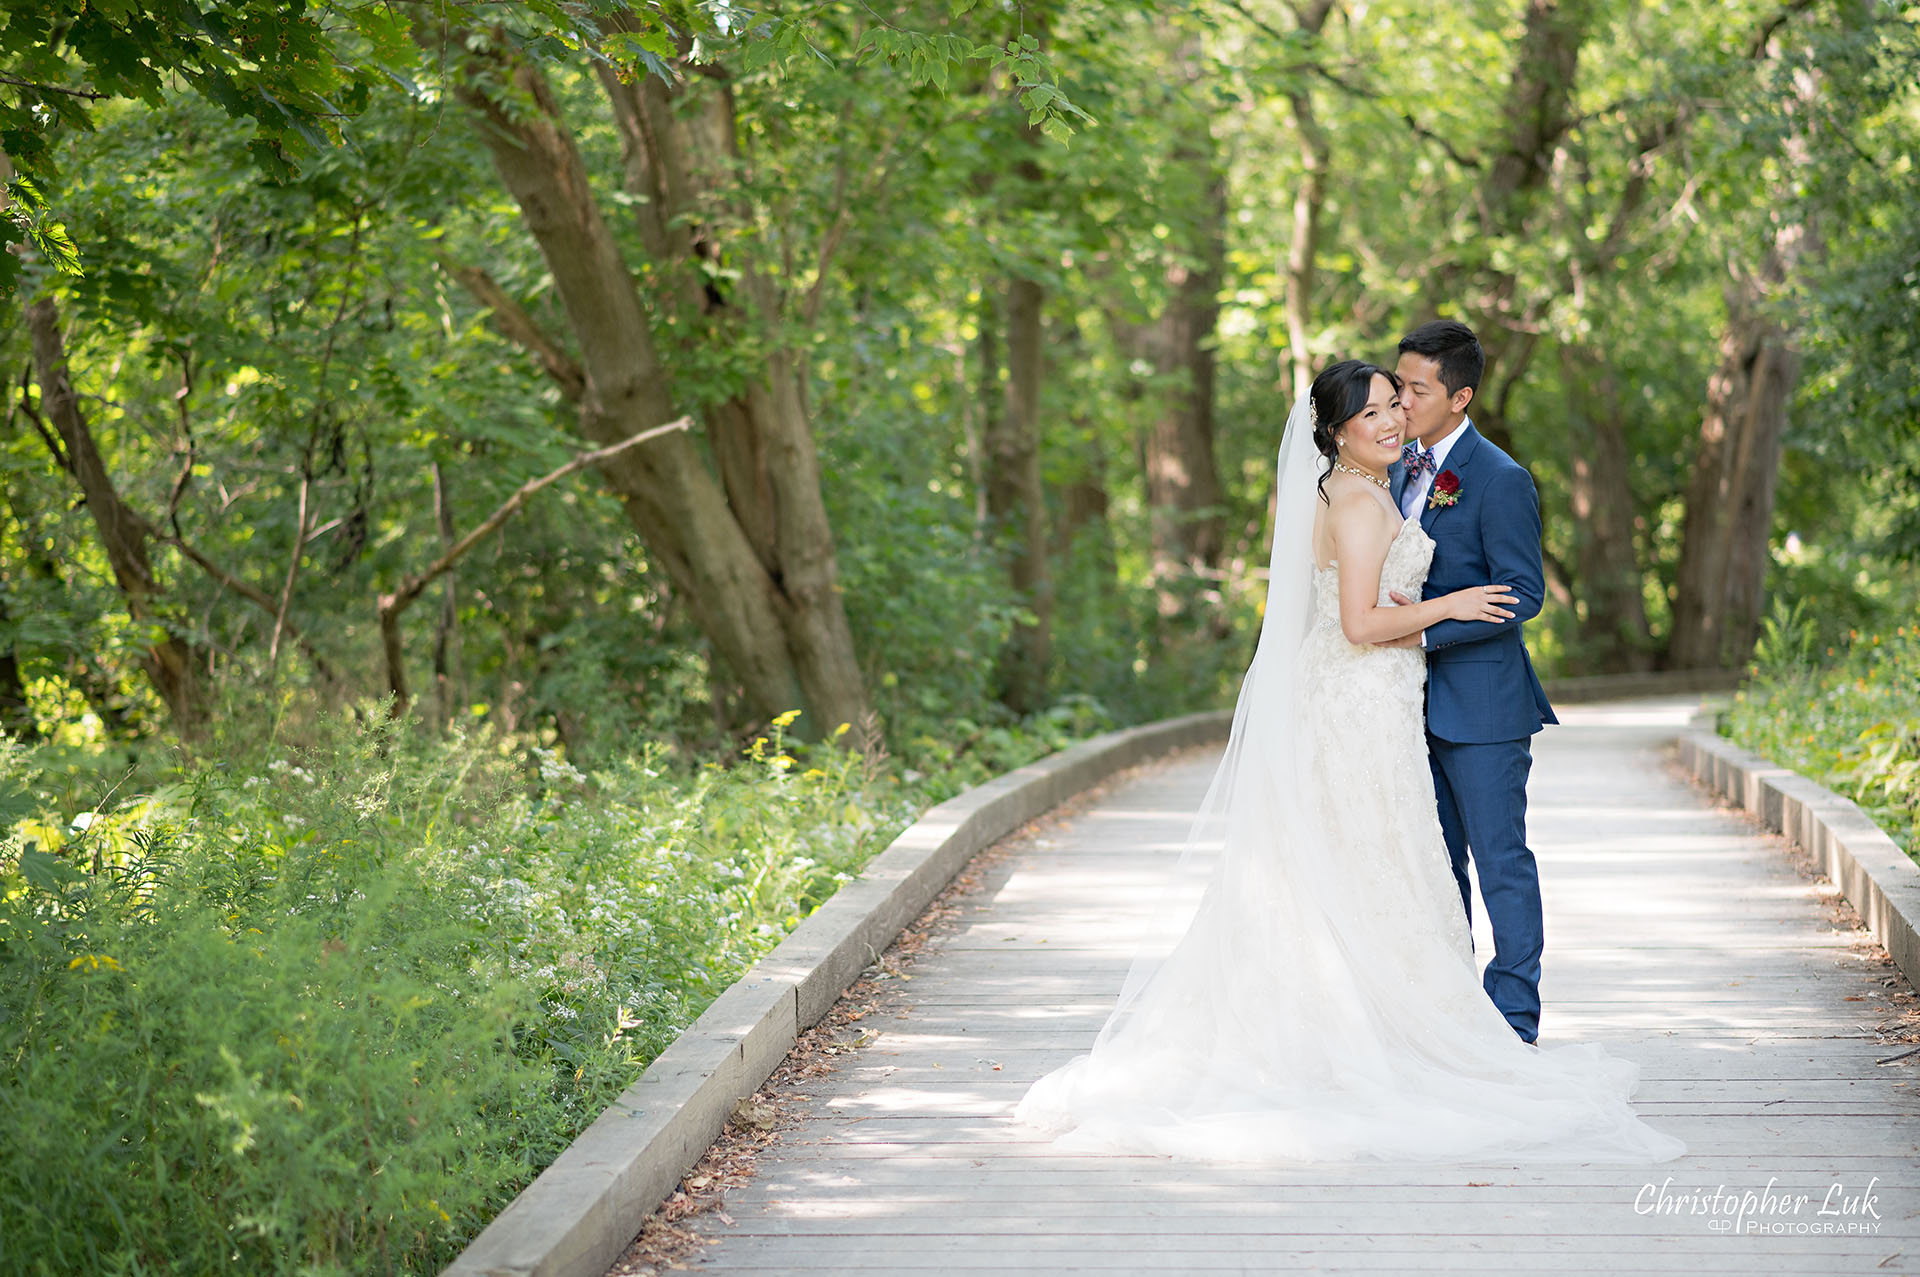 Christopher Luk Toronto Wedding Photographer Bridle Trail Baptist Church Unionville Main Street Crystal Fountain Event Venue Bride Groom Natural Photojournalistic Candid Creative Portrait Session Pictures Forest Trail Walkway Boardwalk Hug Kiss Landscape